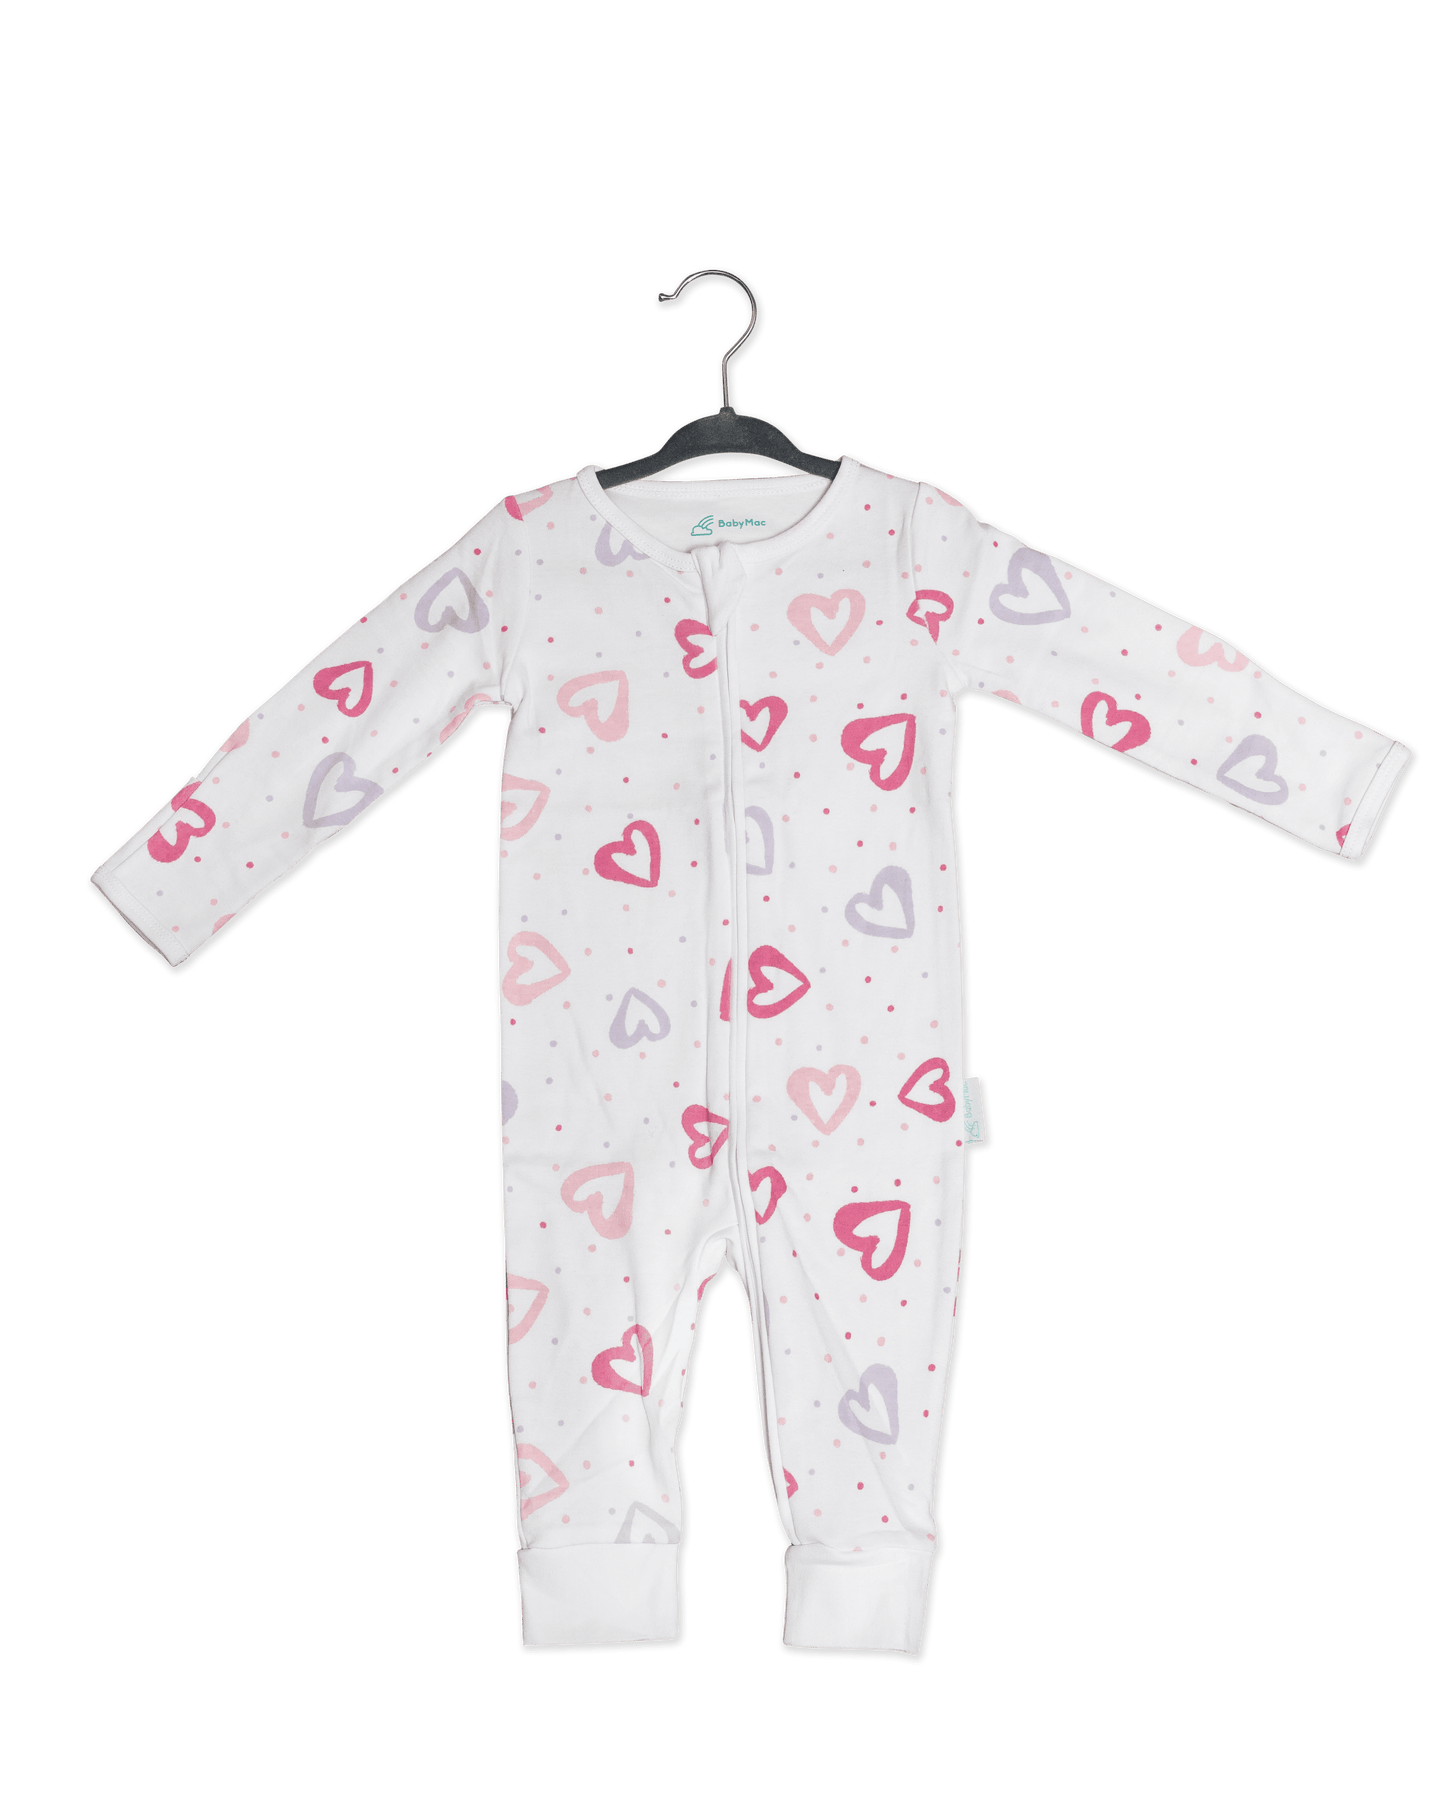 Organic Cotton Double Zip Sleepsuit For Baby By BabyMac - Stylemykid.com